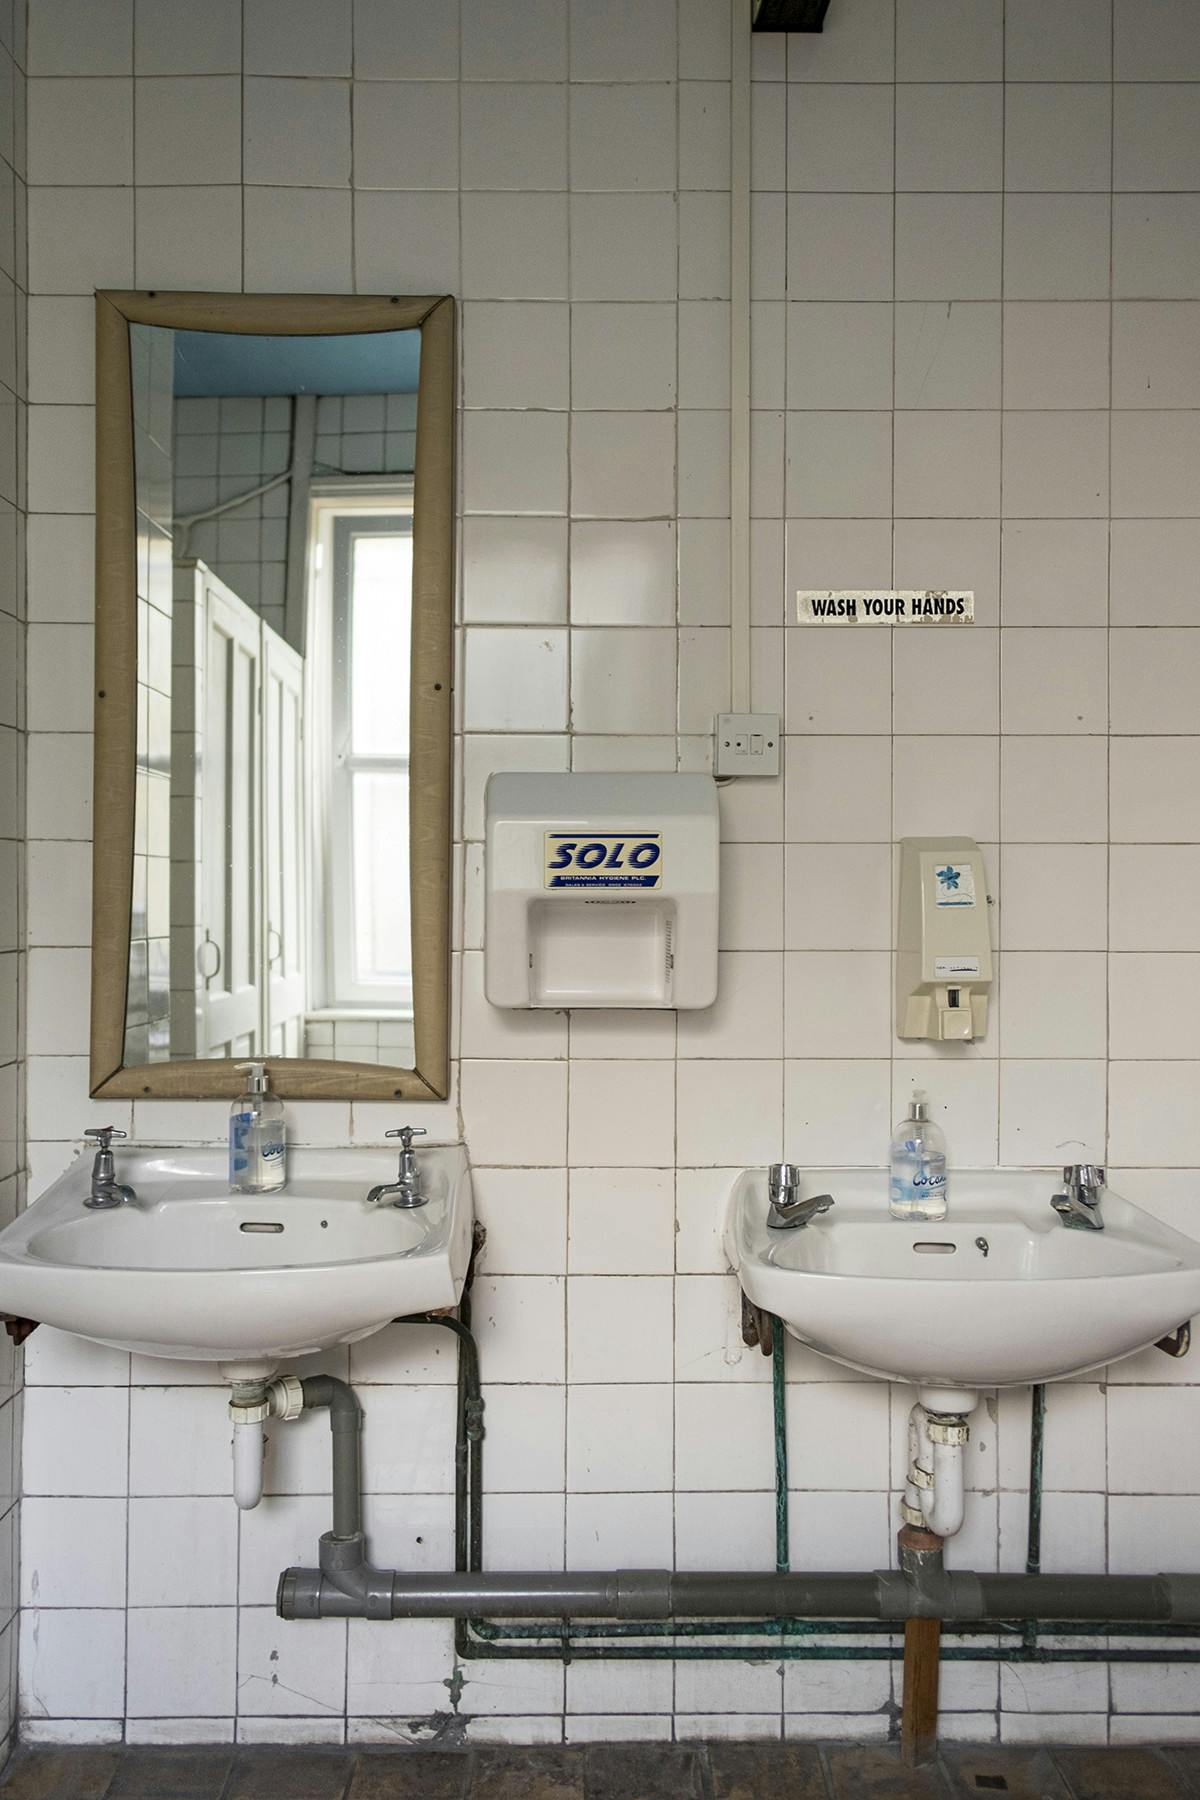 An image from Hand Dryers by Samuel Ryde